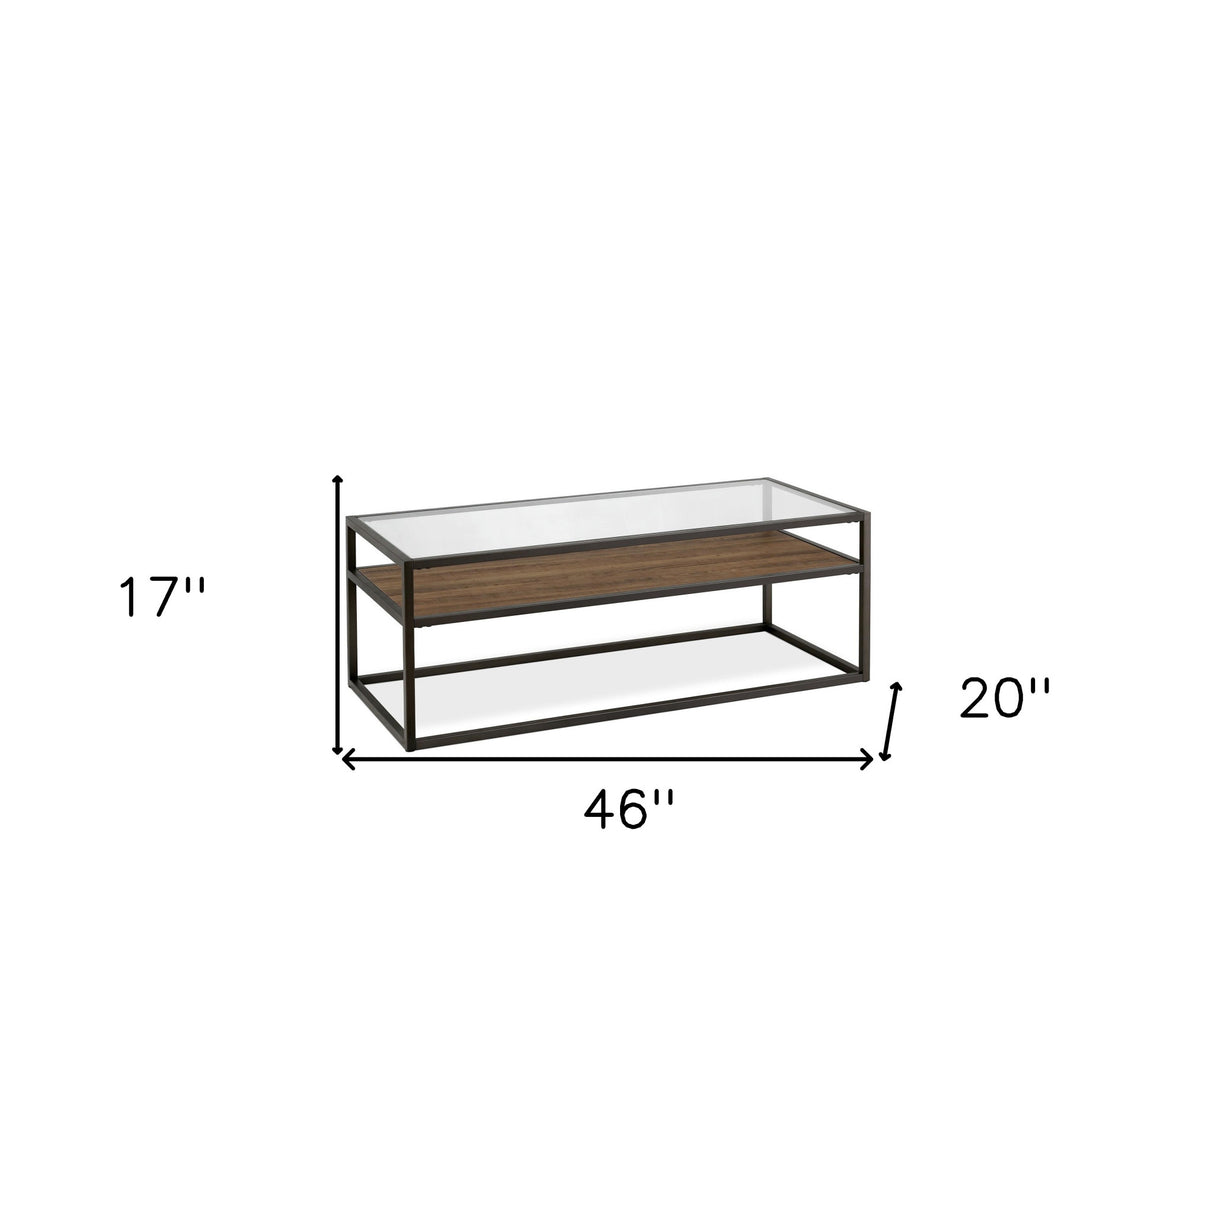 46" Black and Clear Glass And Steel Coffee Table With Shelf